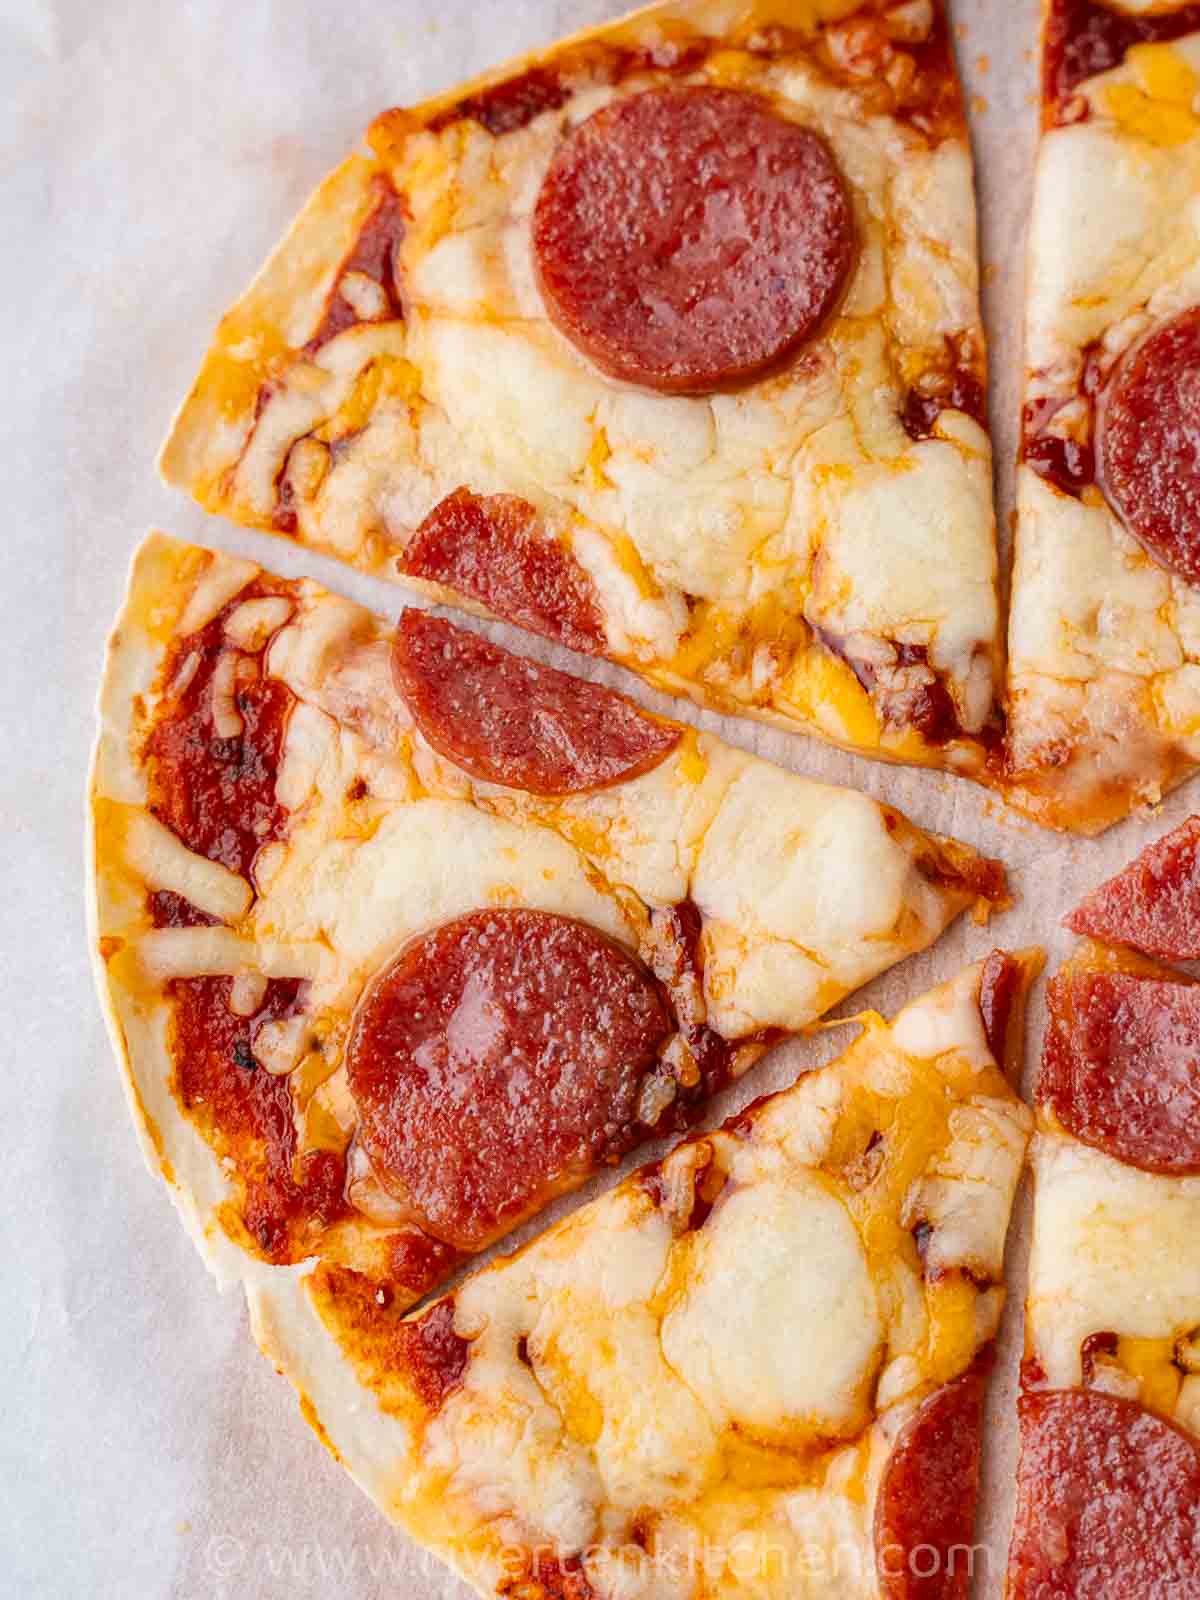 pizza made of tortilla, salami and cheese baked in an air fryer.